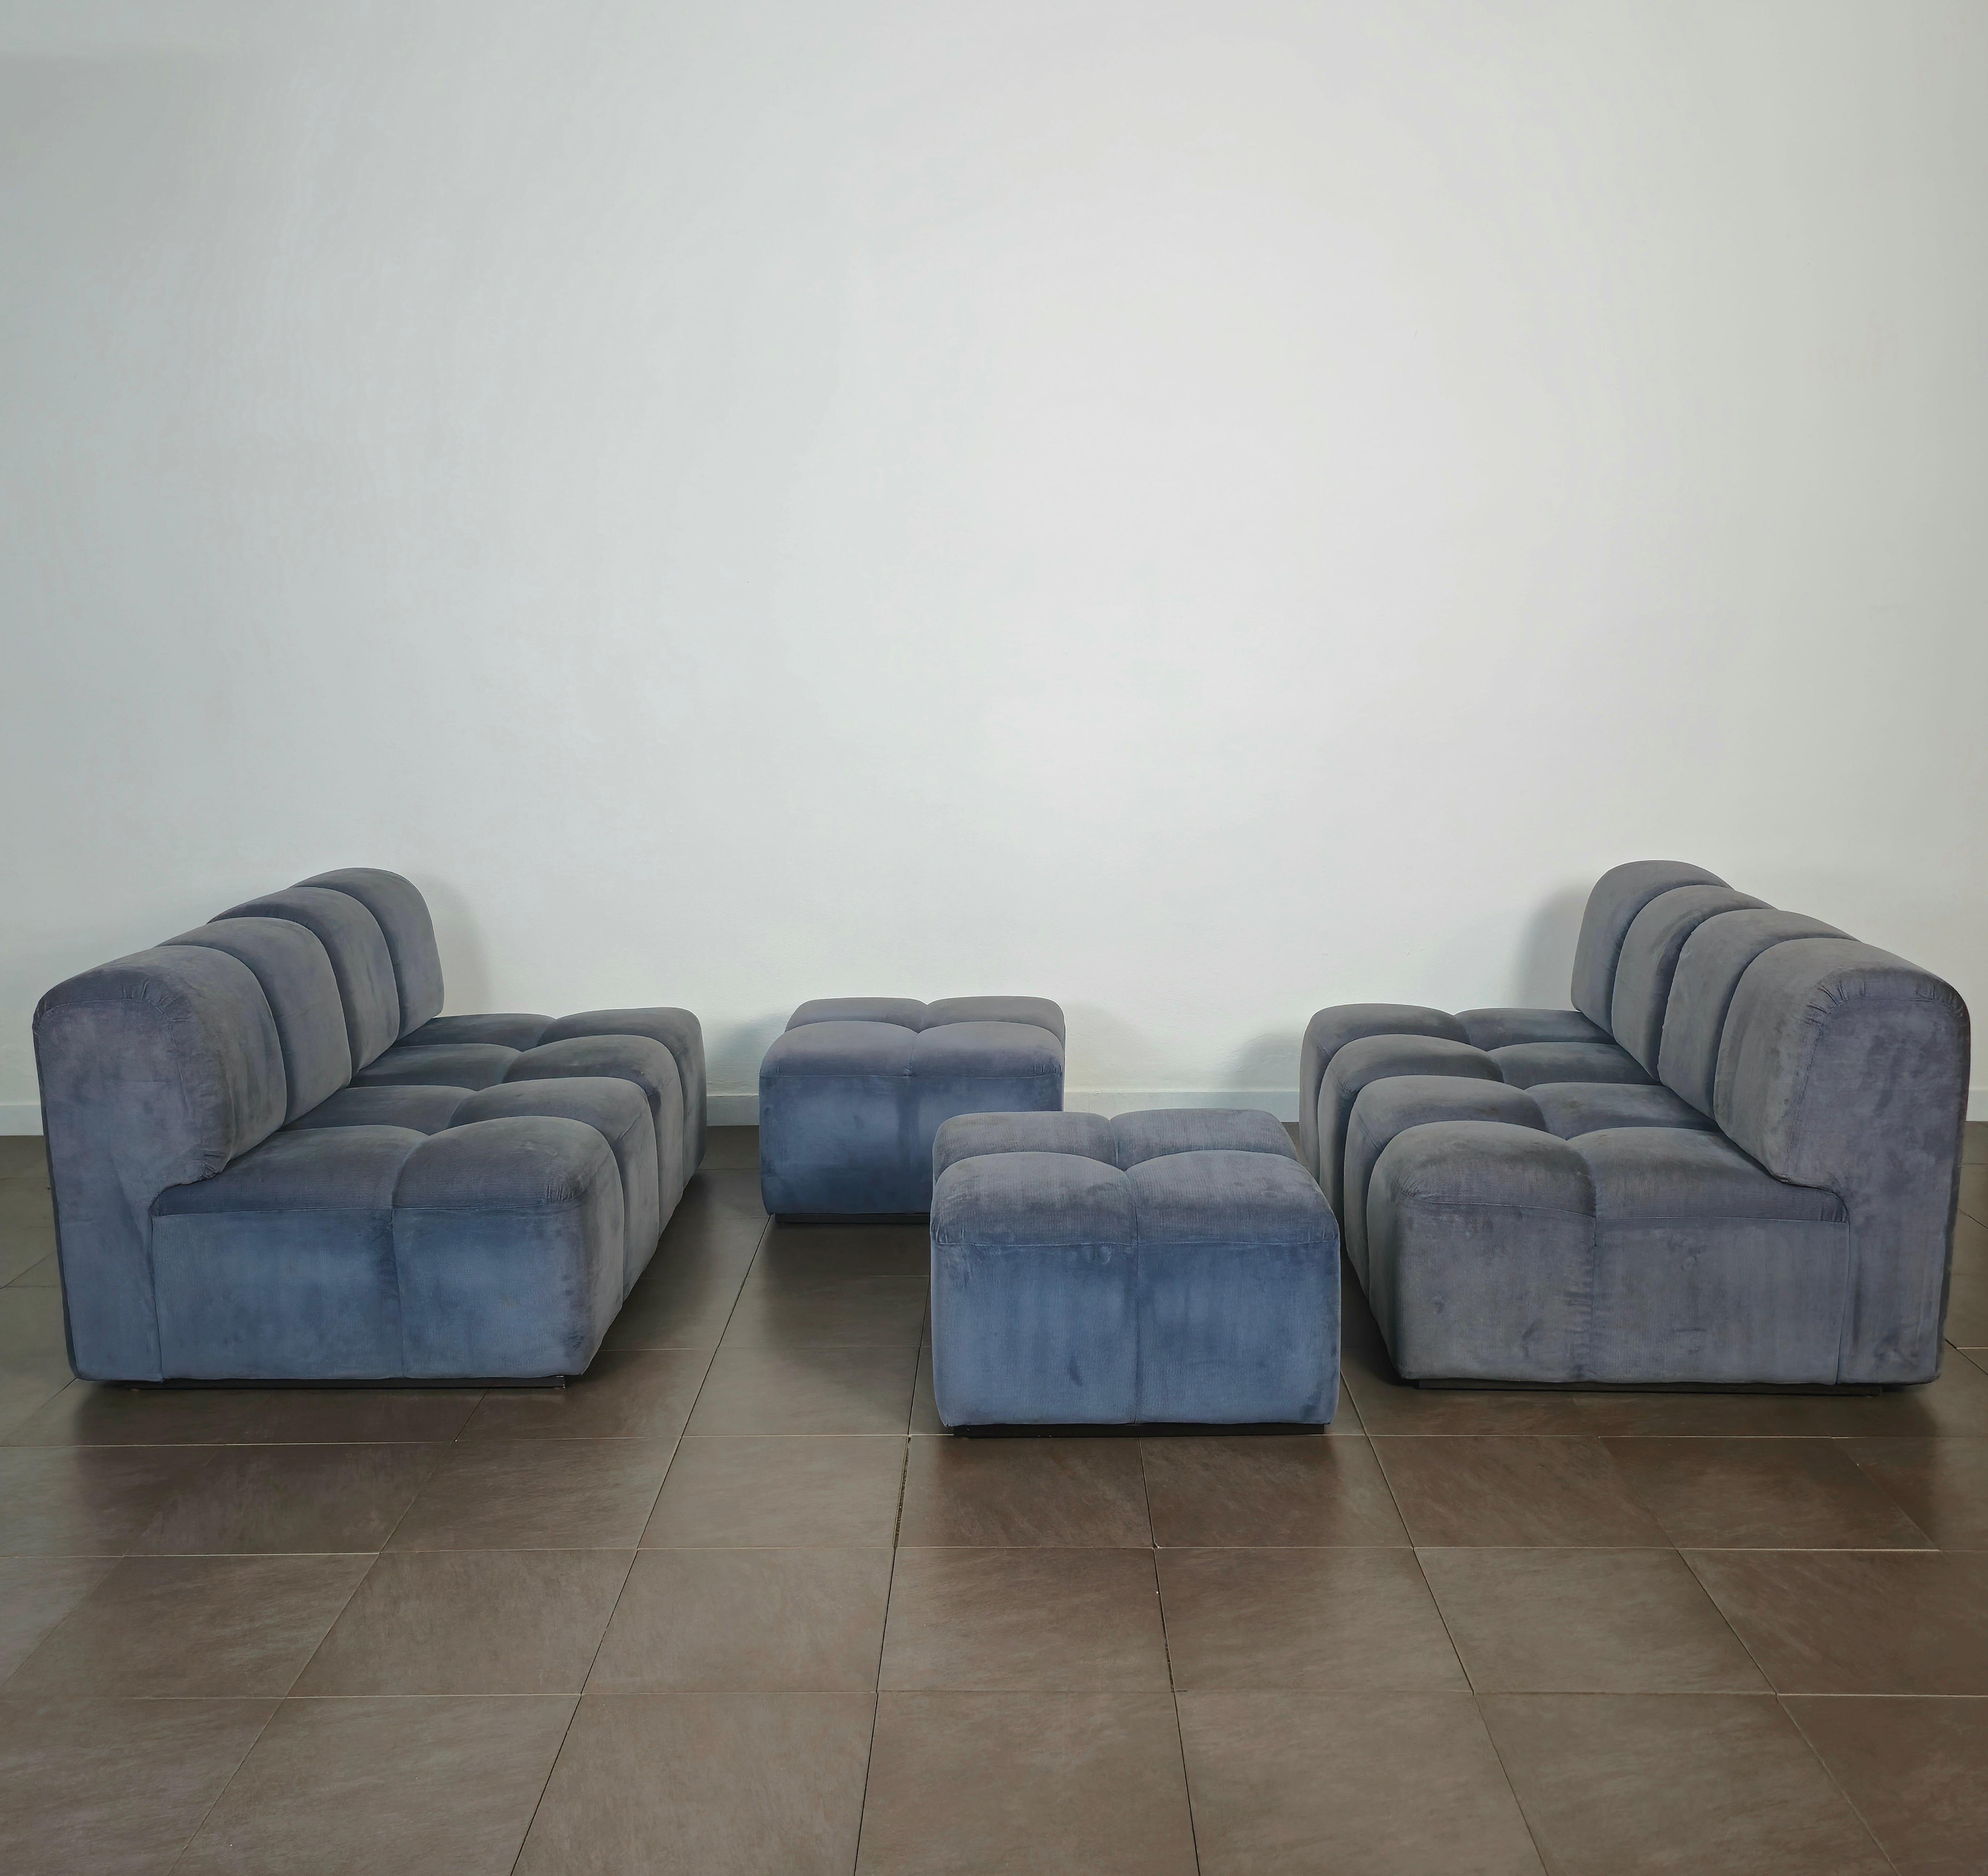 Modular Sofa Poufs Velvet Smooth Midcentury Italian Design 1970s Set of 6 In Good Condition For Sale In Palermo, IT